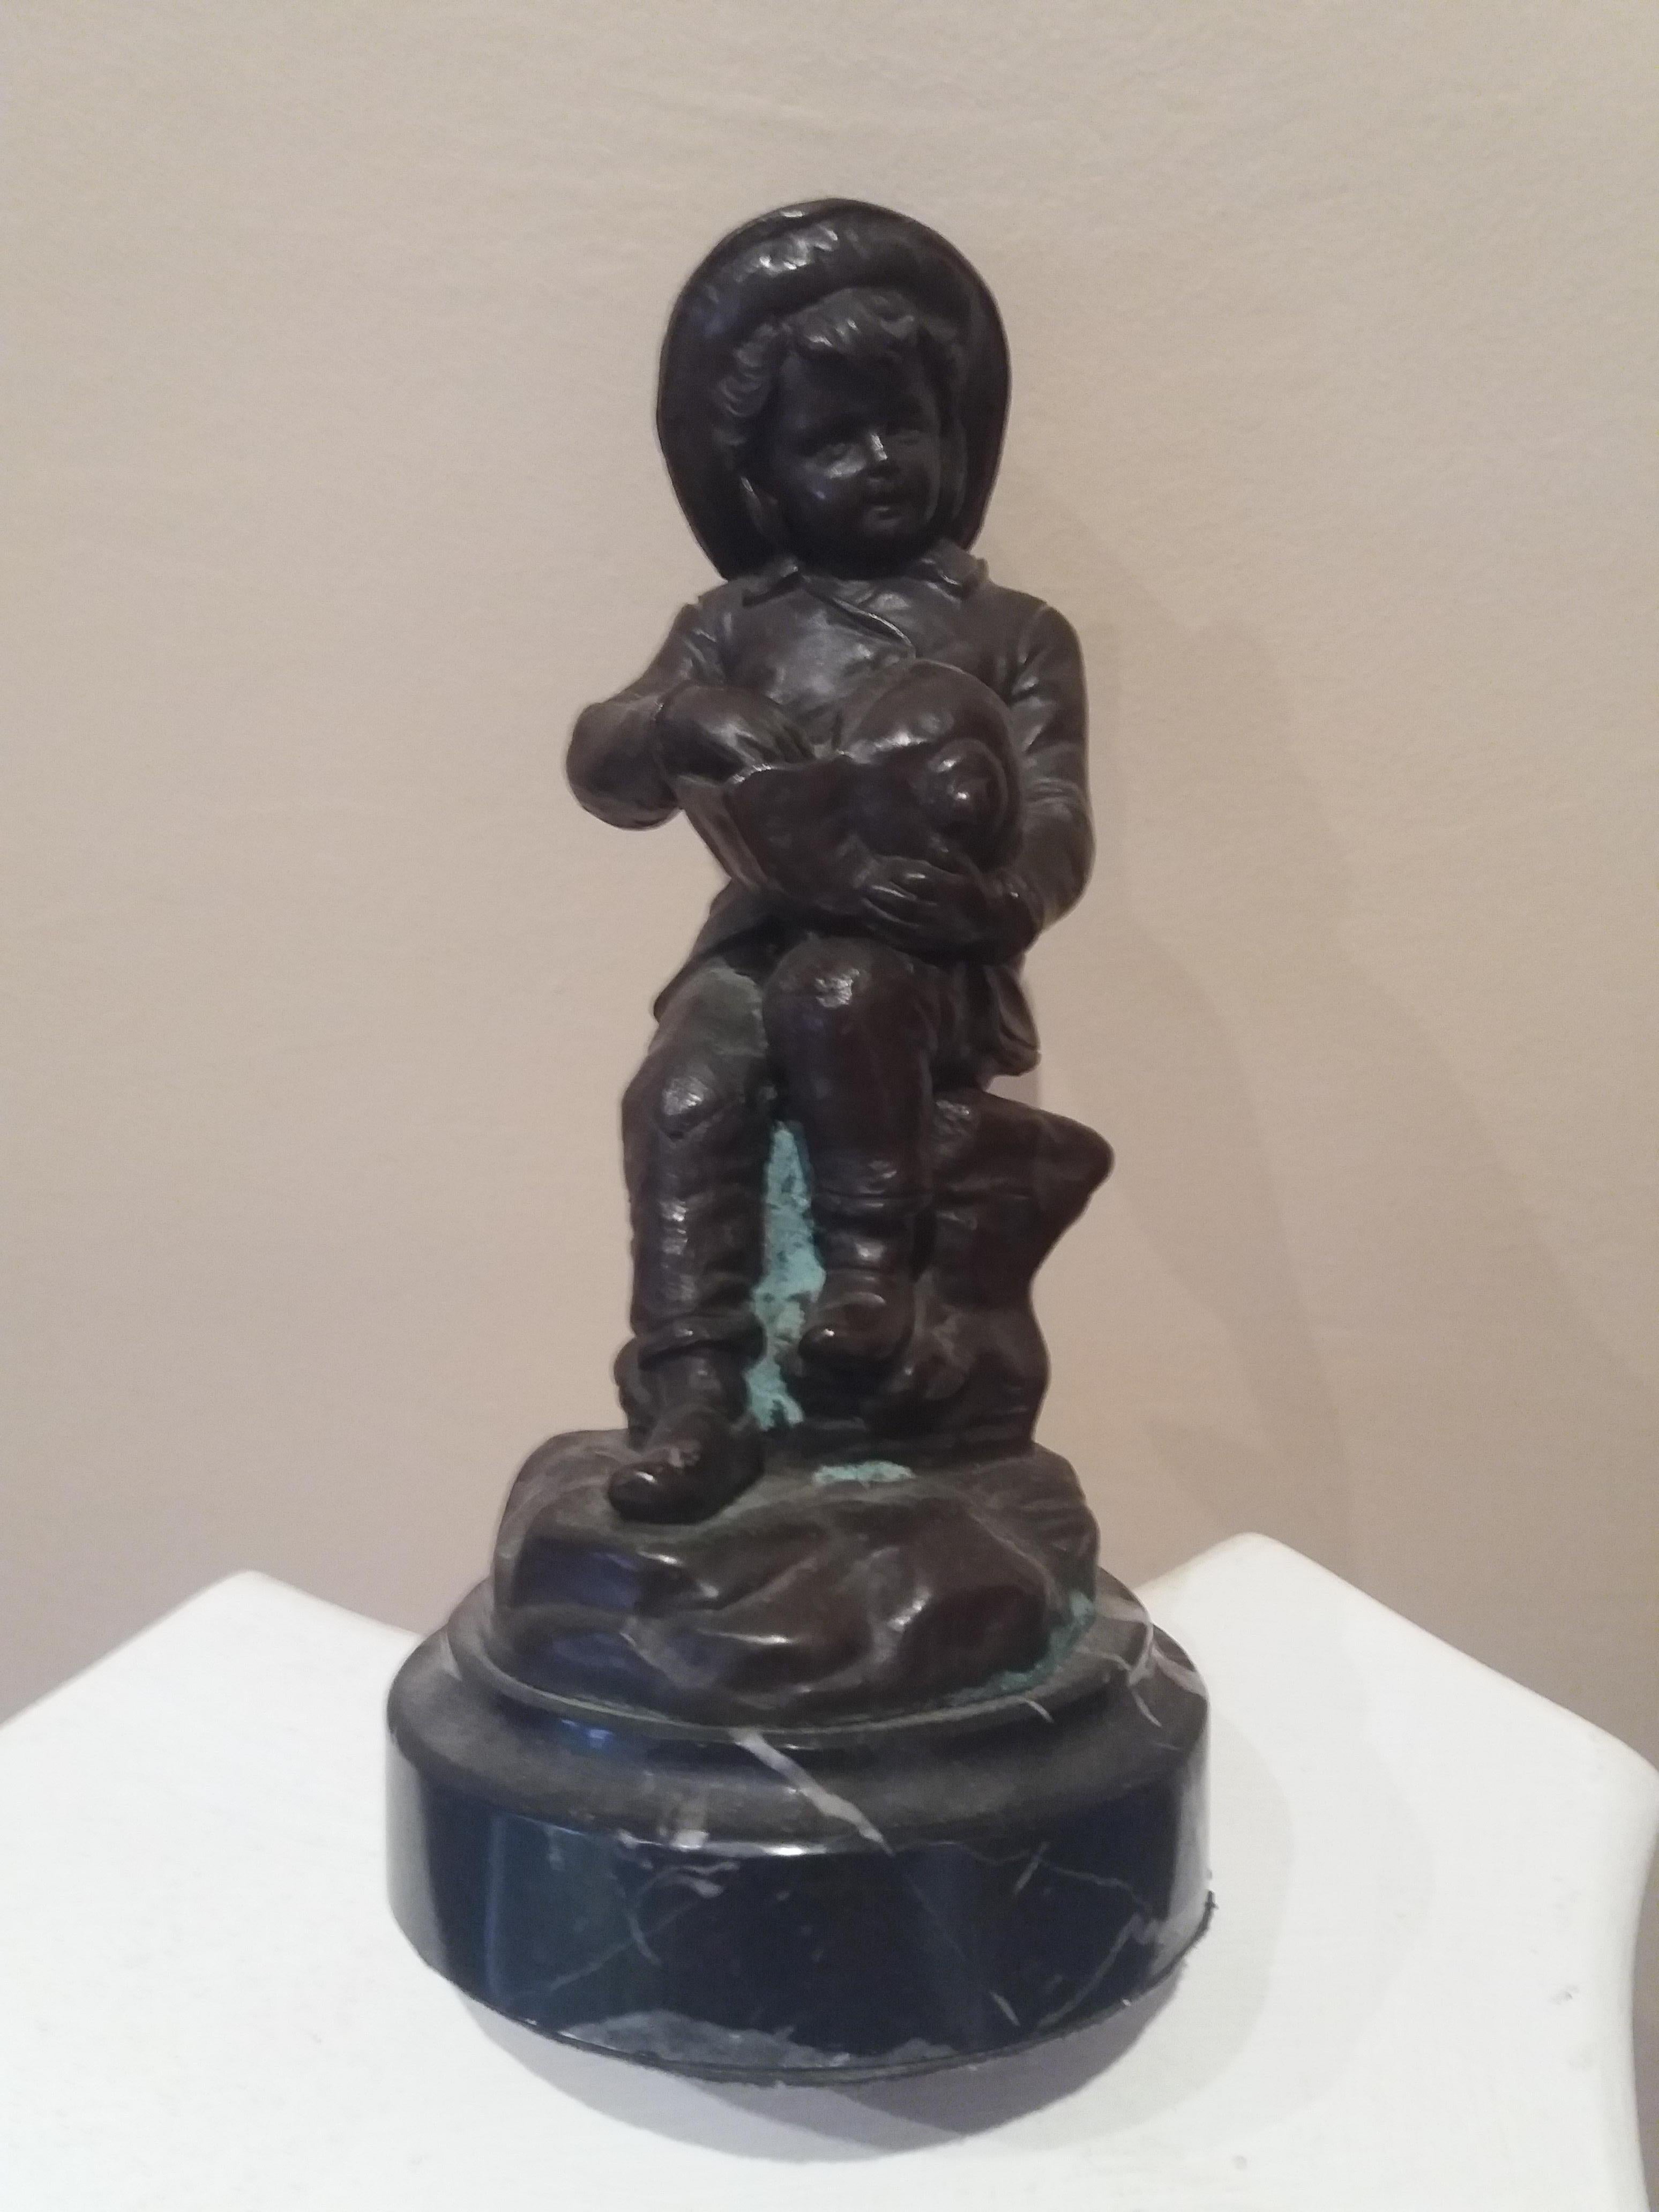  Bollel  Child and conch shell. Original multiple bronze sculpture - Realist Sculpture by BOLLEL